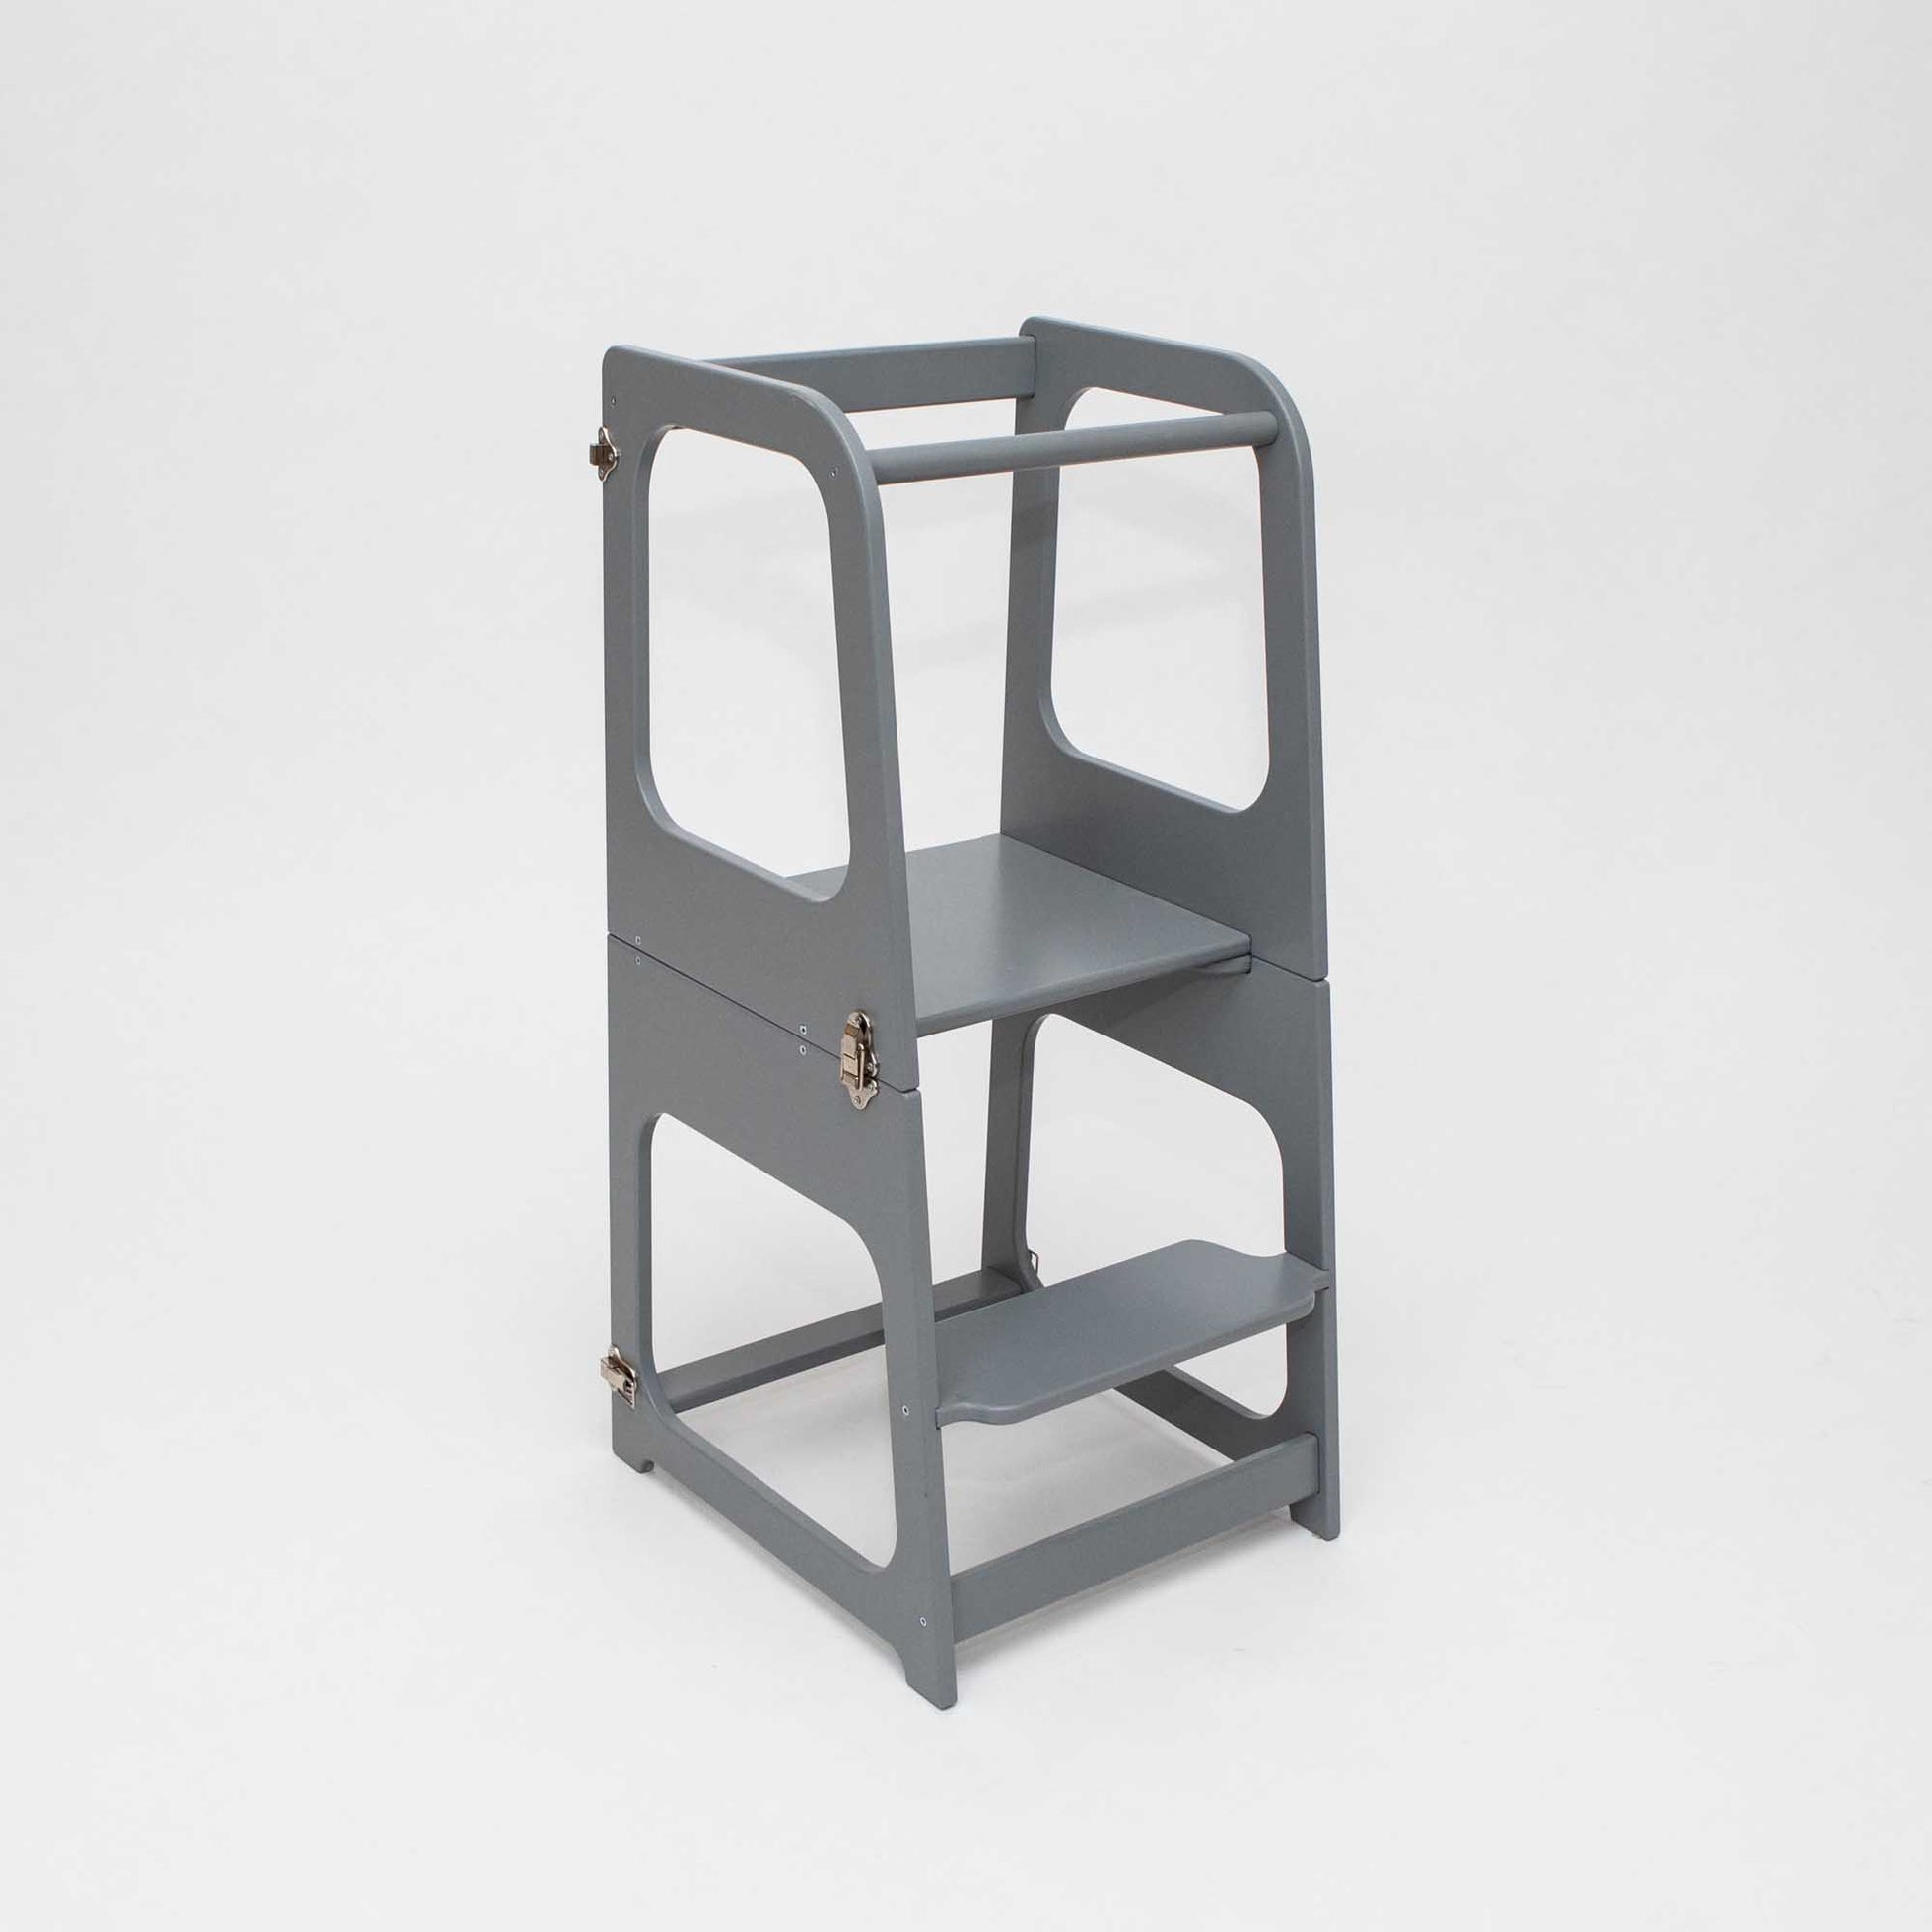 A 2-in-1 Convertible kitchen tower - table and chair for toddlers on a white background.